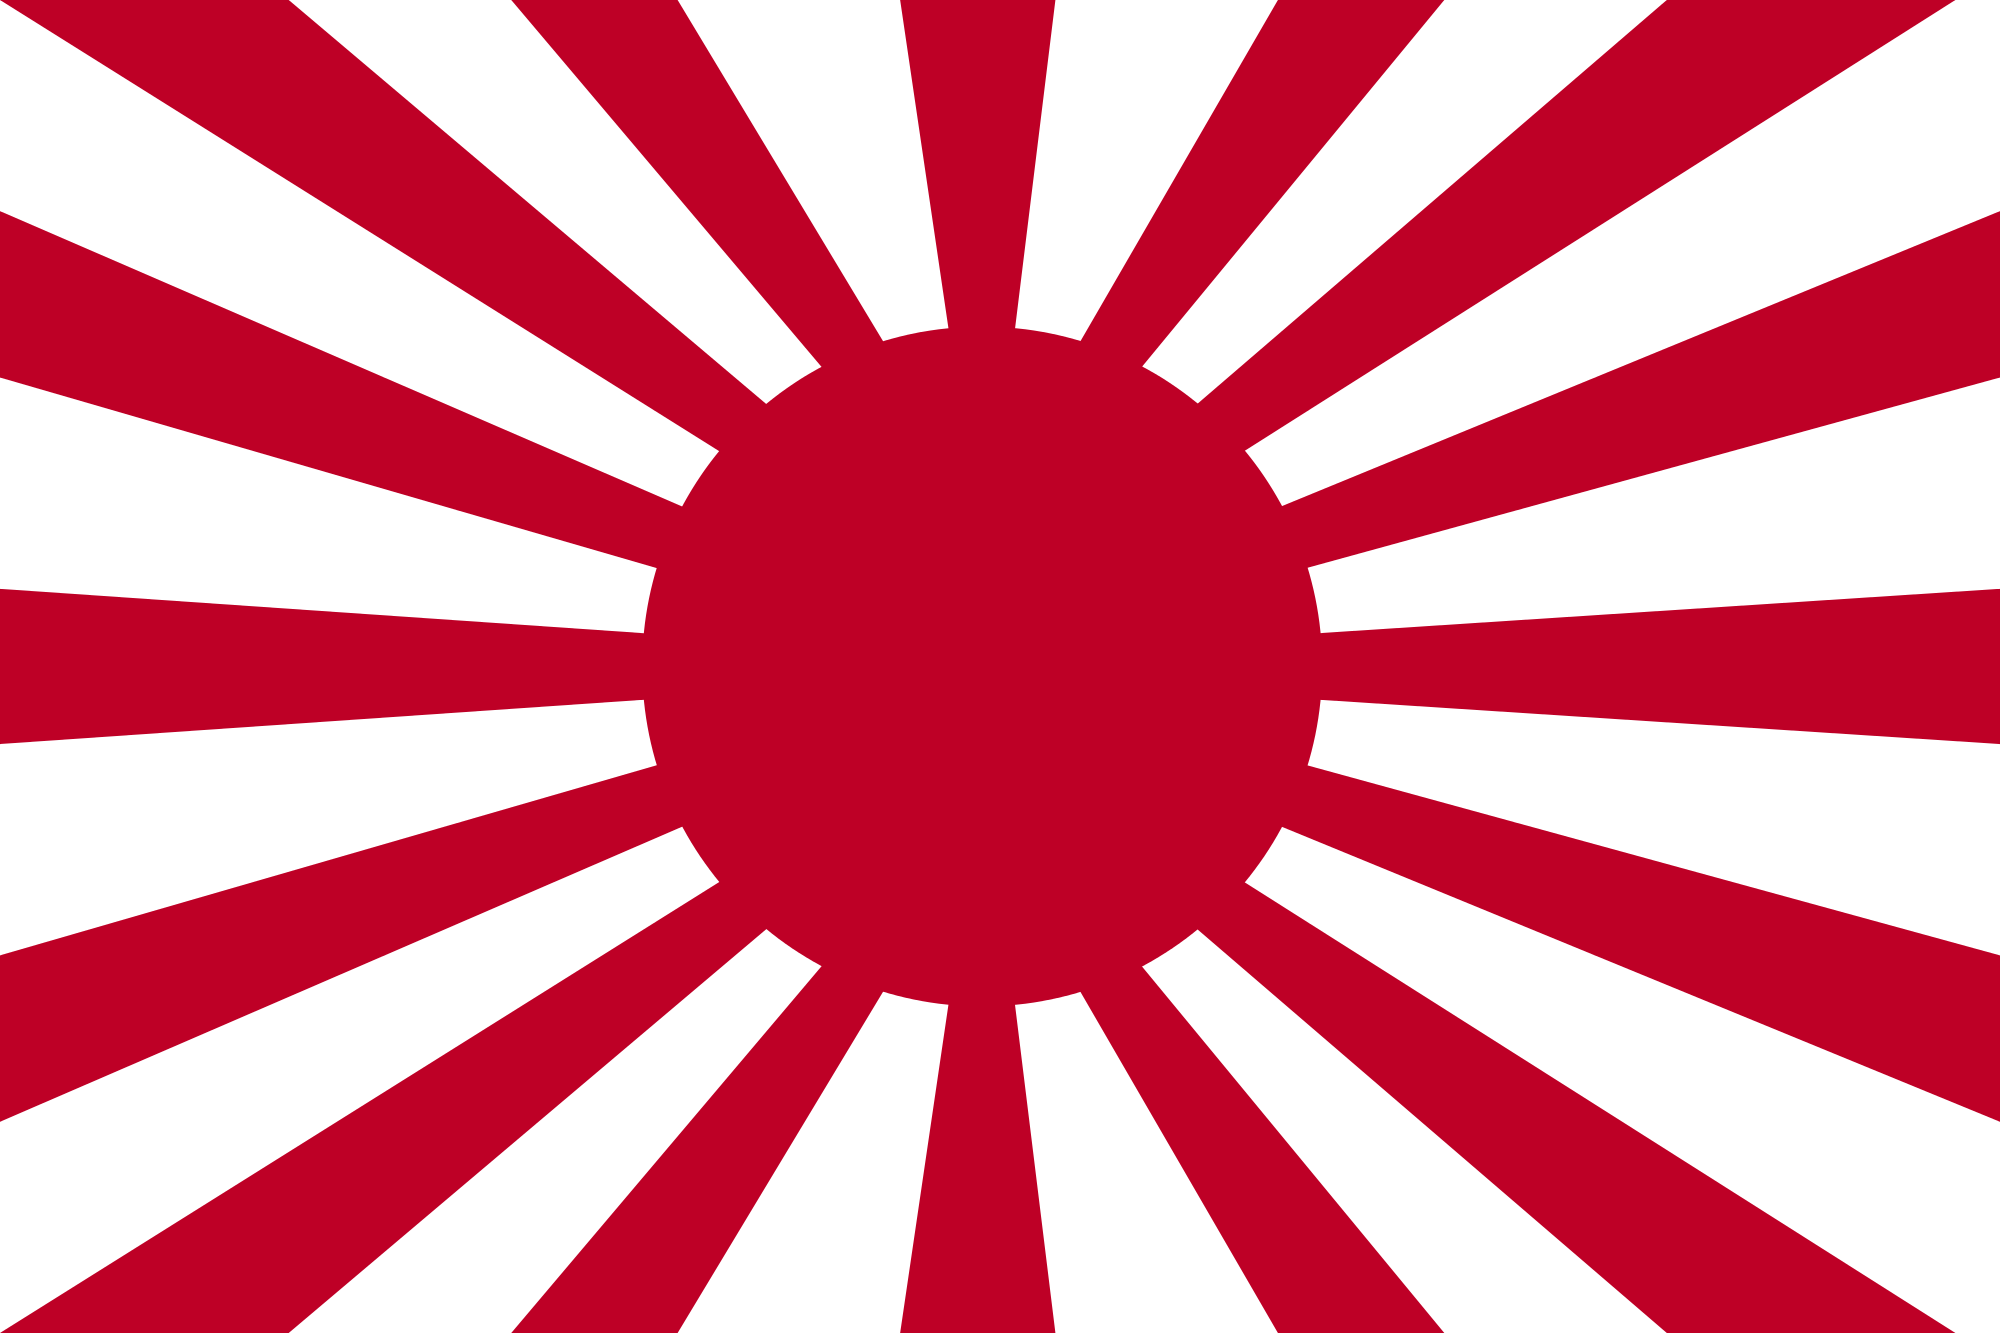 File:War flag of the Imperial Japanese Army - Wikimedia Commons